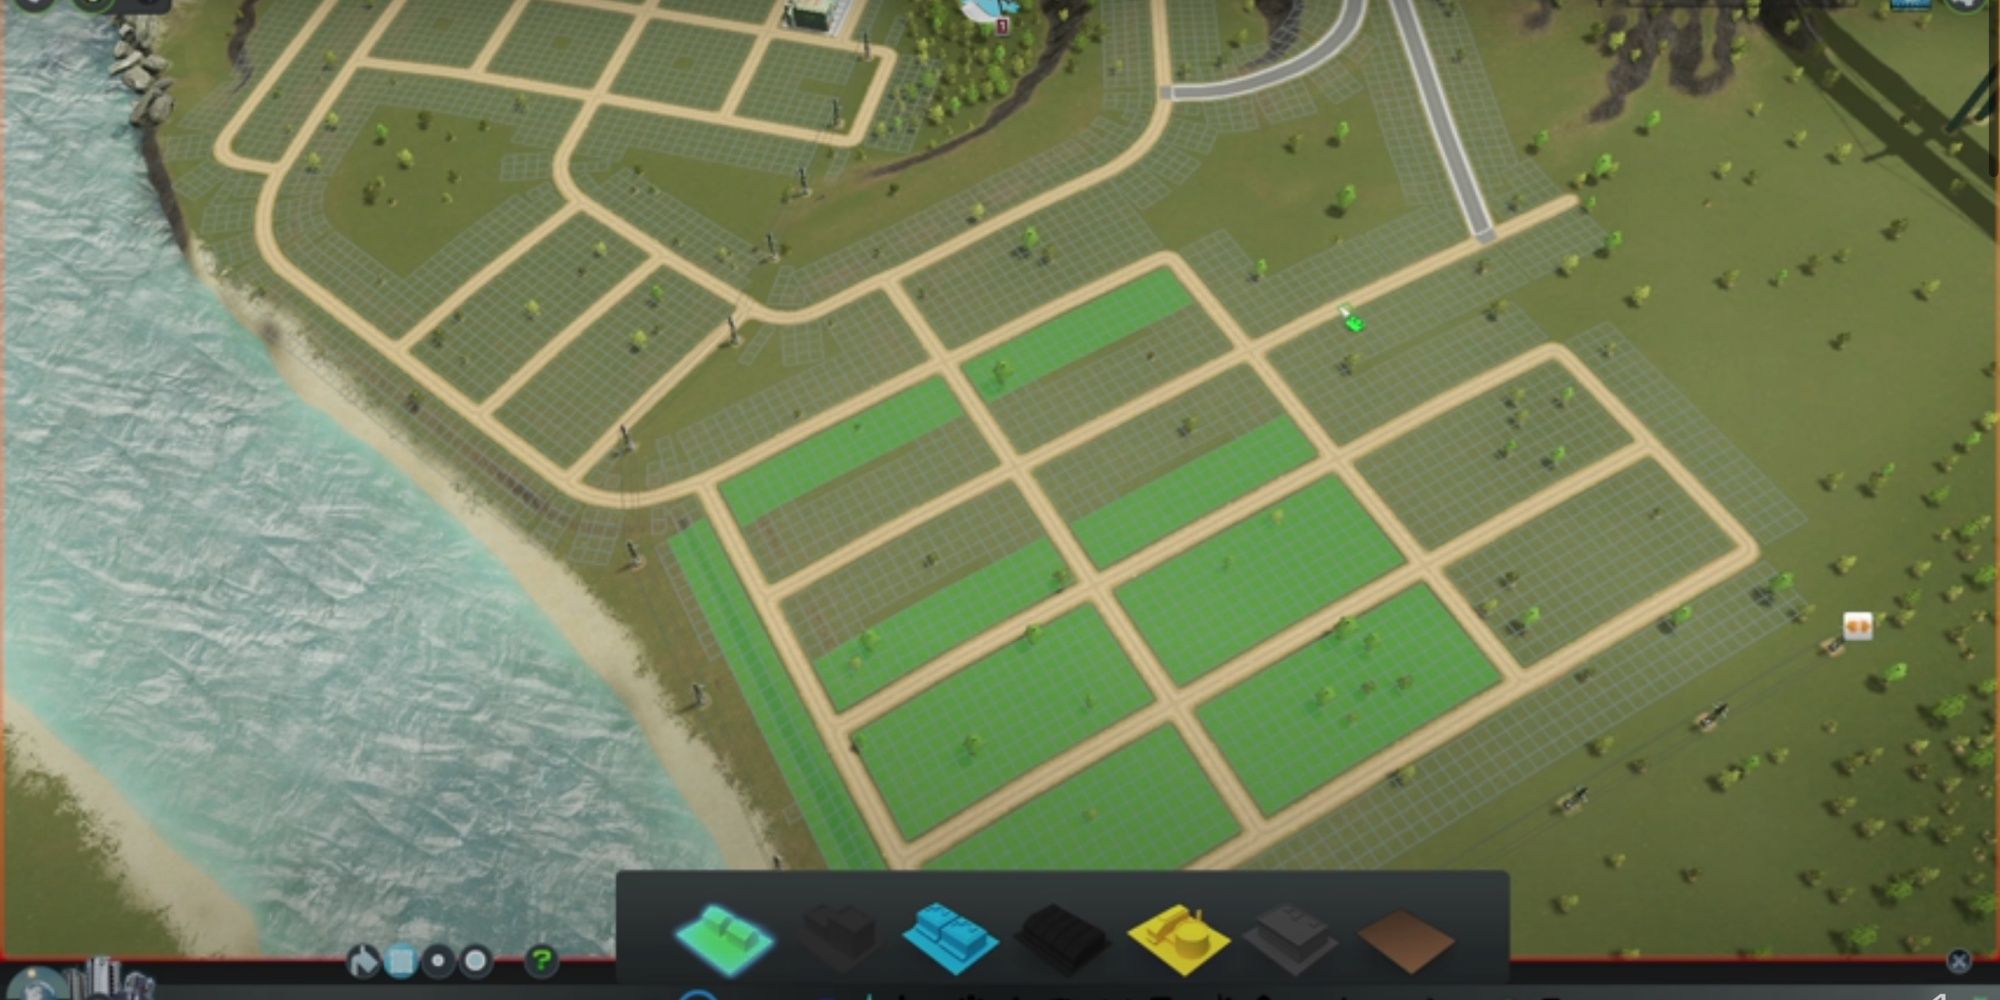 An early road layout being zoned in Cities: Skylines